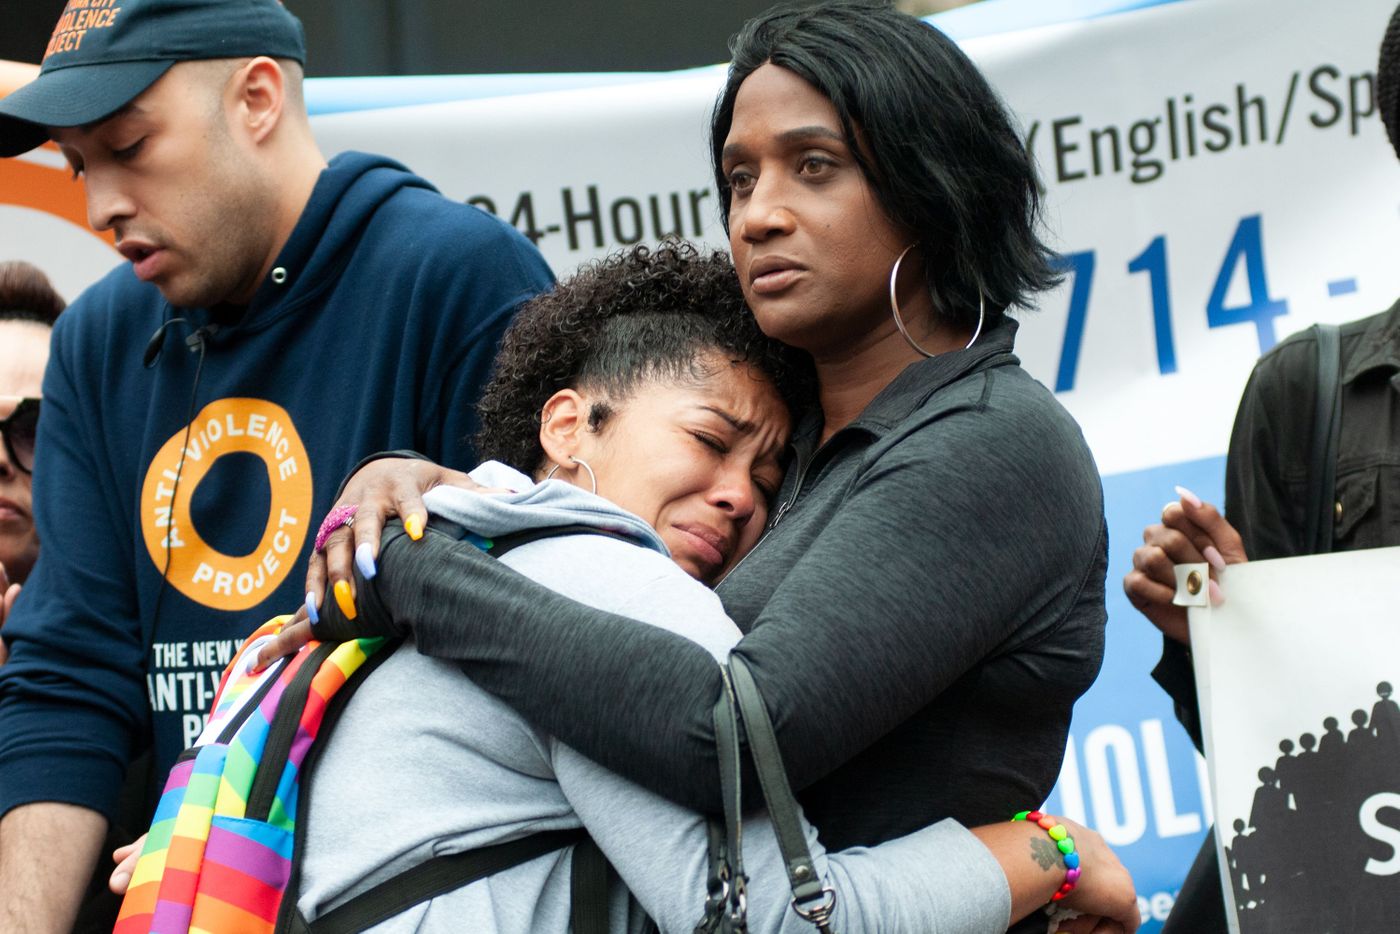 Layleen Polanco’s sister Melania Brown, left, hugs Tabytha Gonzalez at a rally in Foley Square on Monday, June 10.